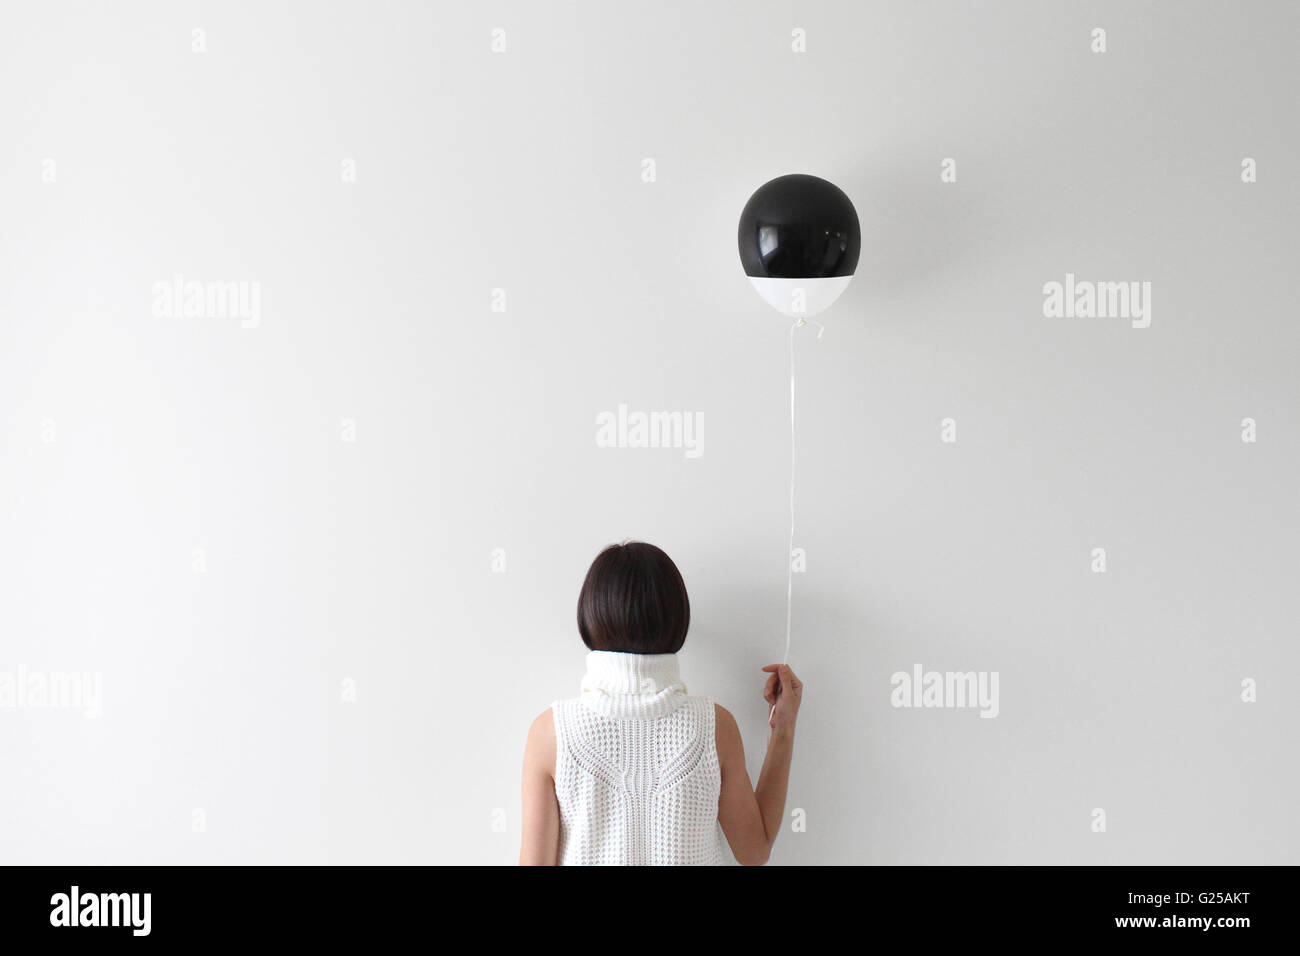 Rear view portrait of a woman facing wall holding balloon Stock Photo